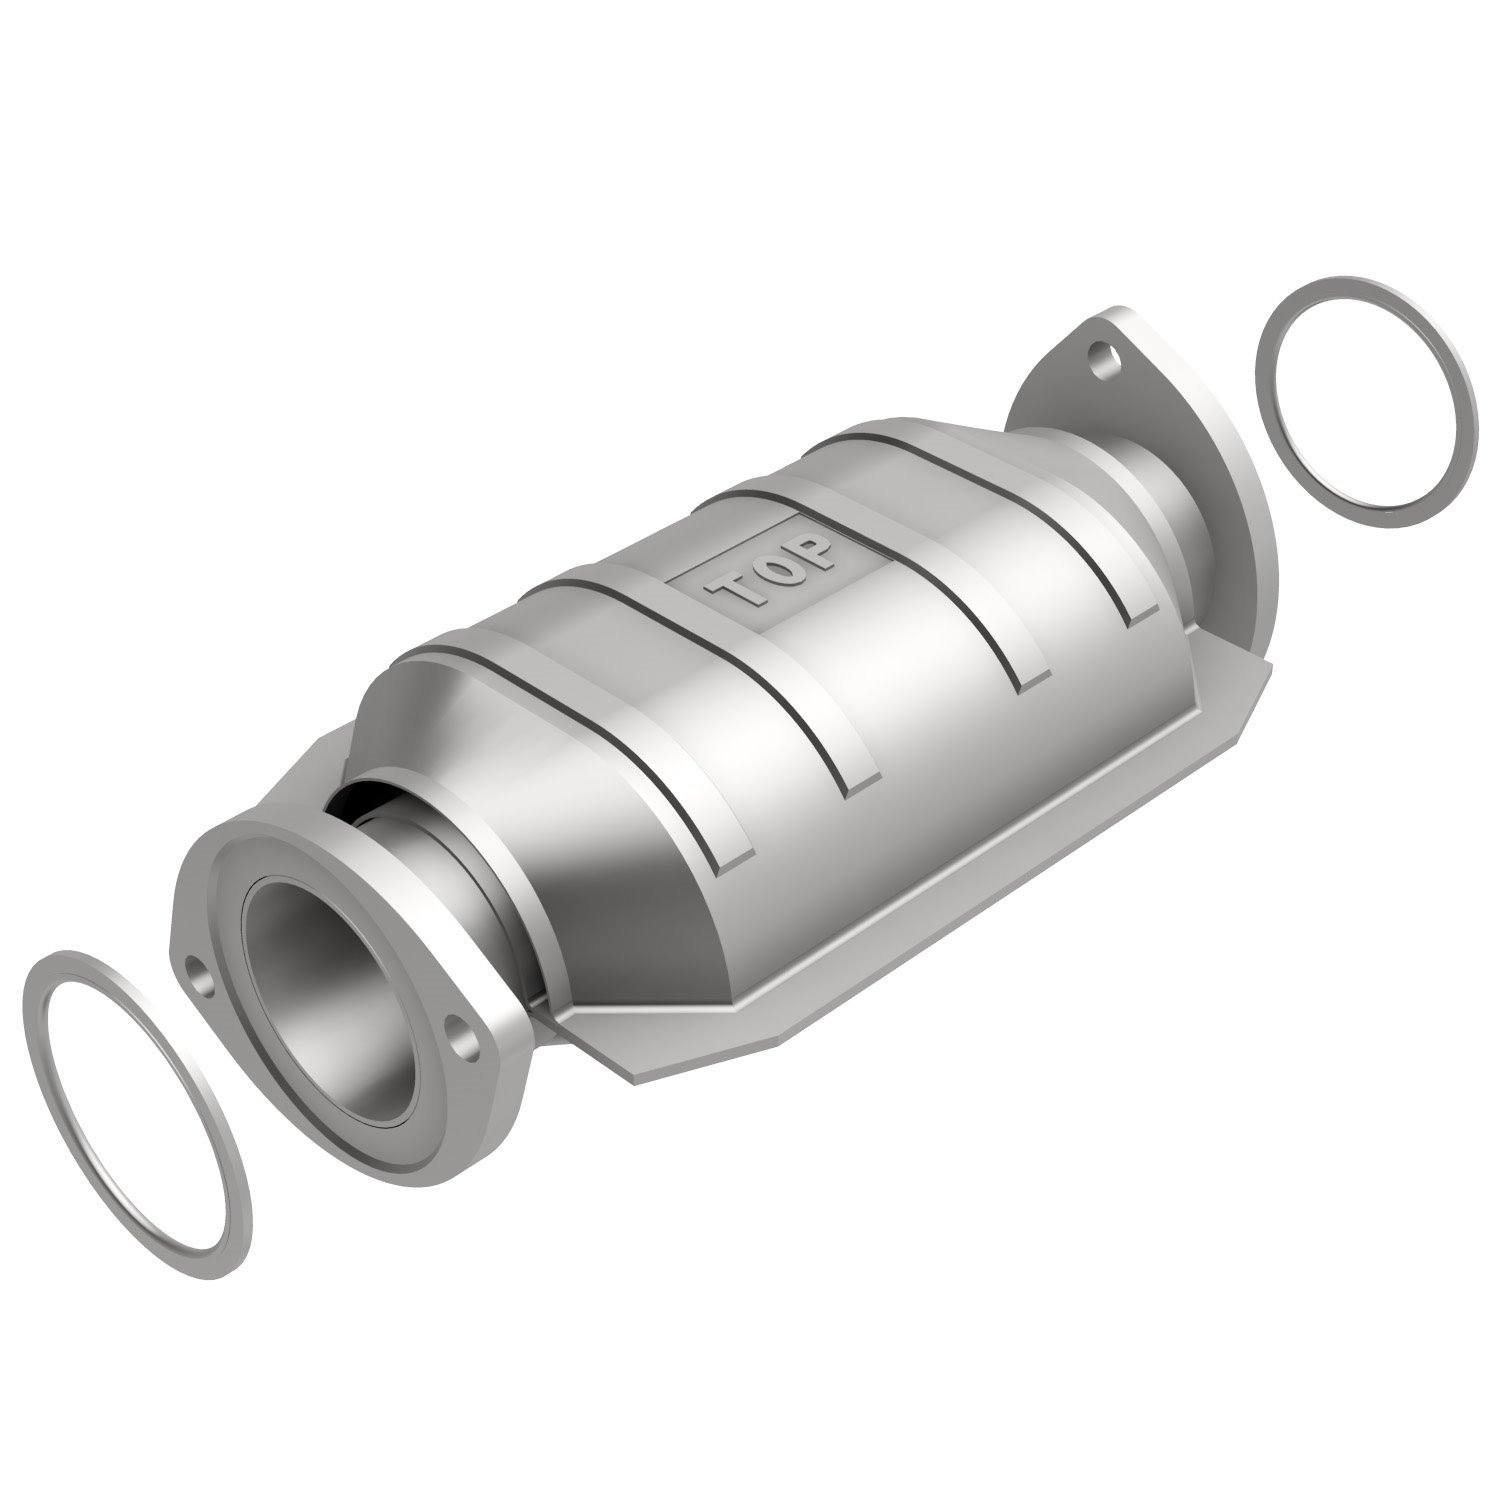 HM Grade Federal / EPA Compliant Direct-Fit Catalytic Converter 23622